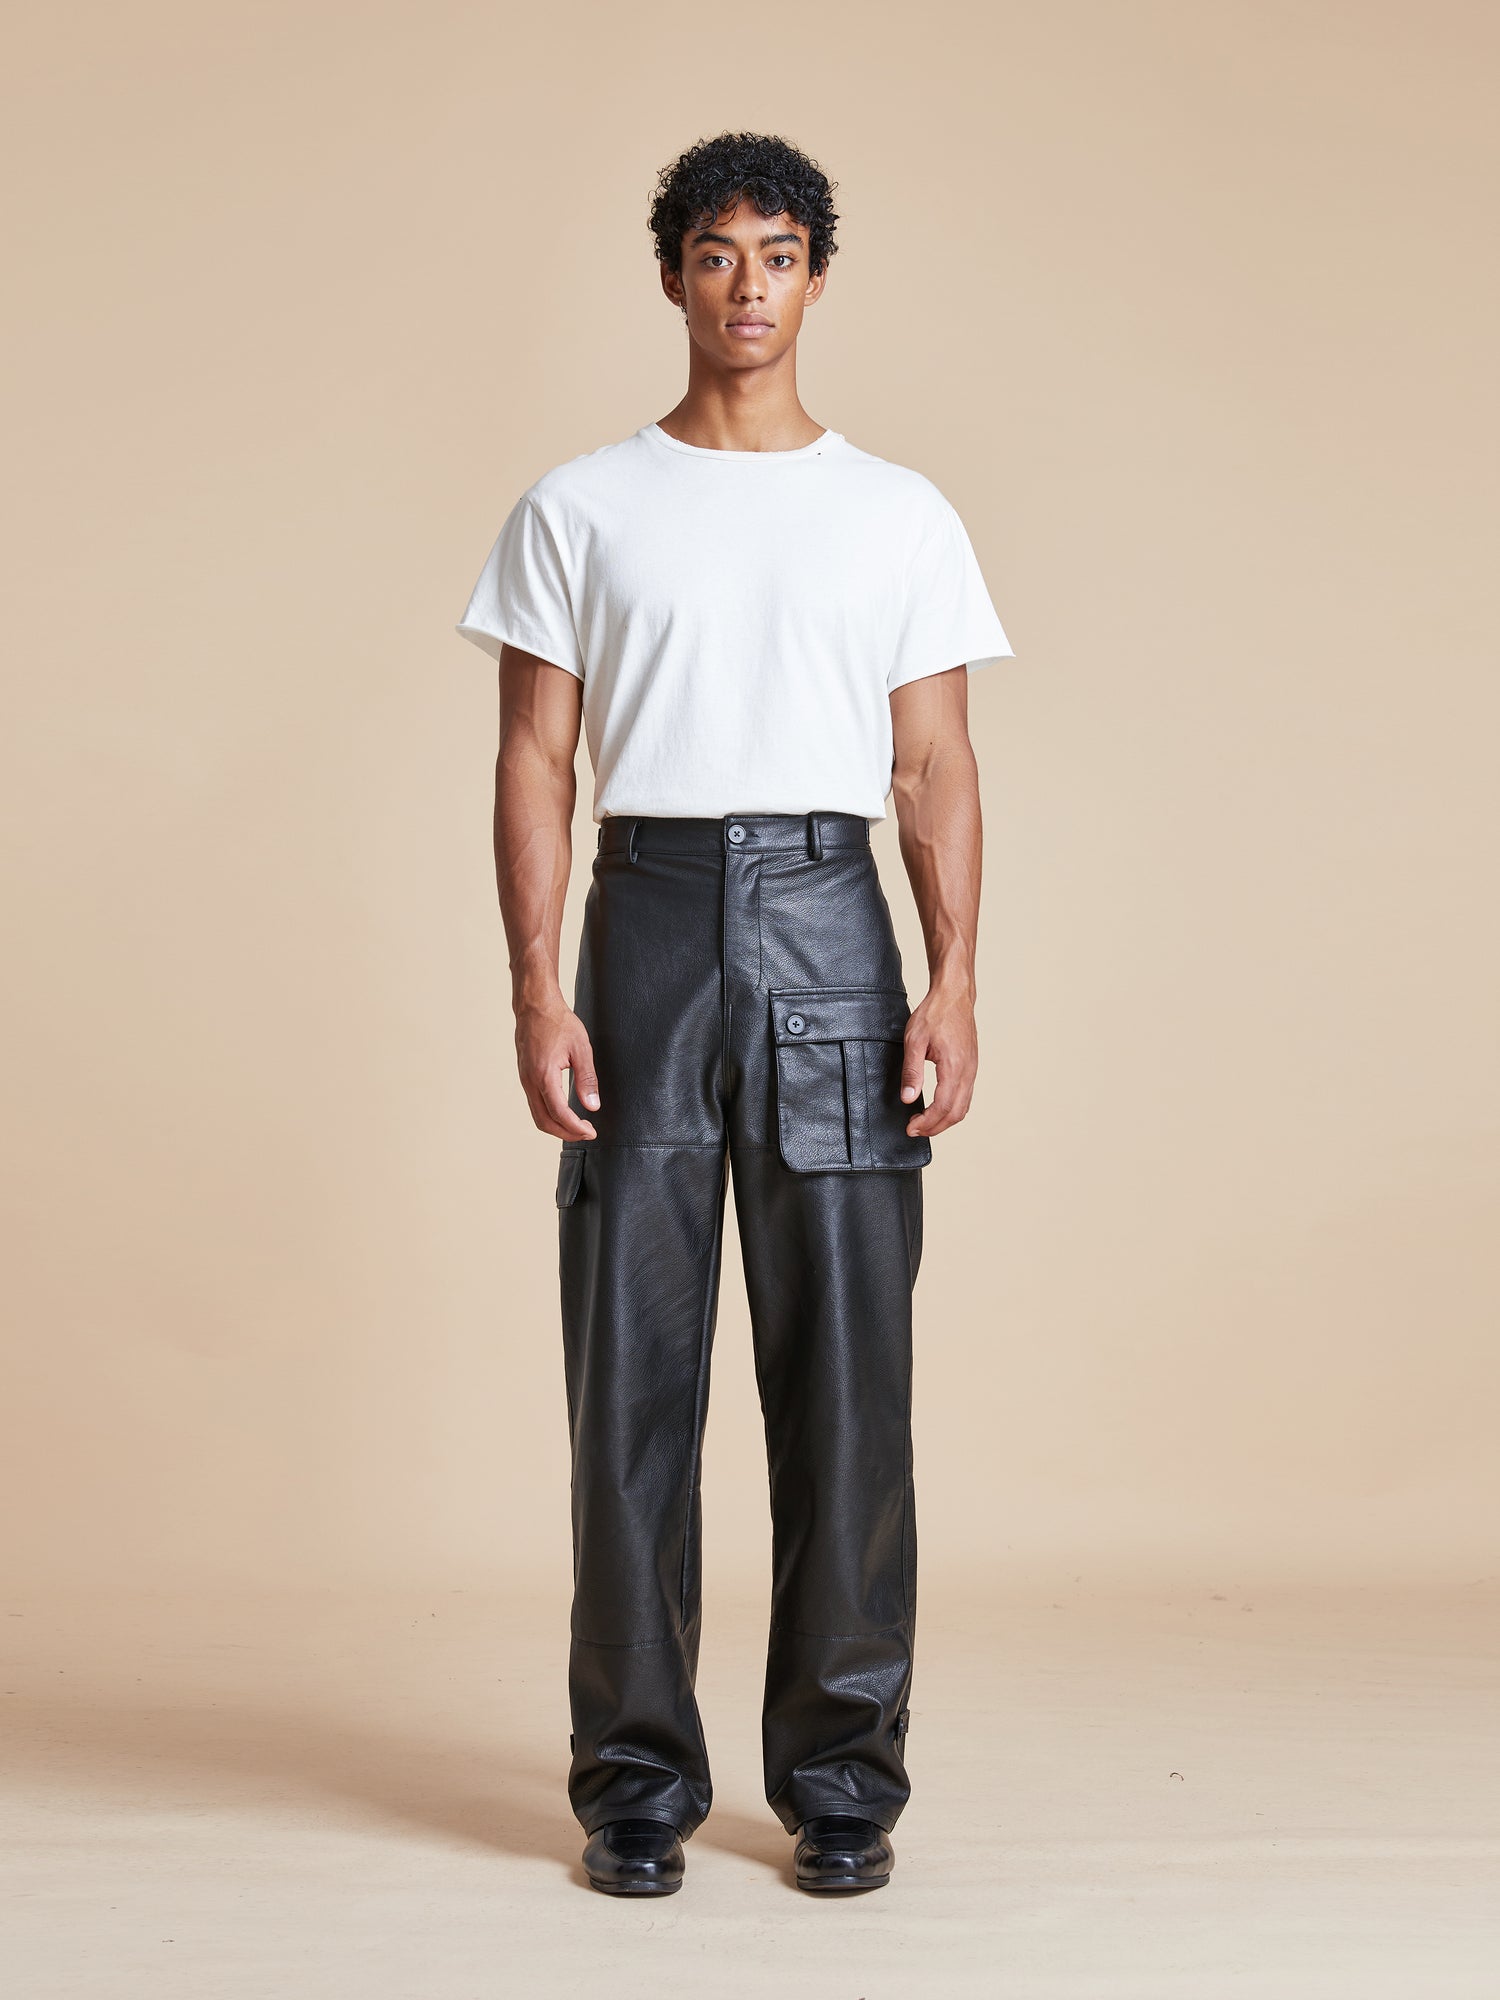 A man wearing Found faux leather cargo pants and a white t-shirt.